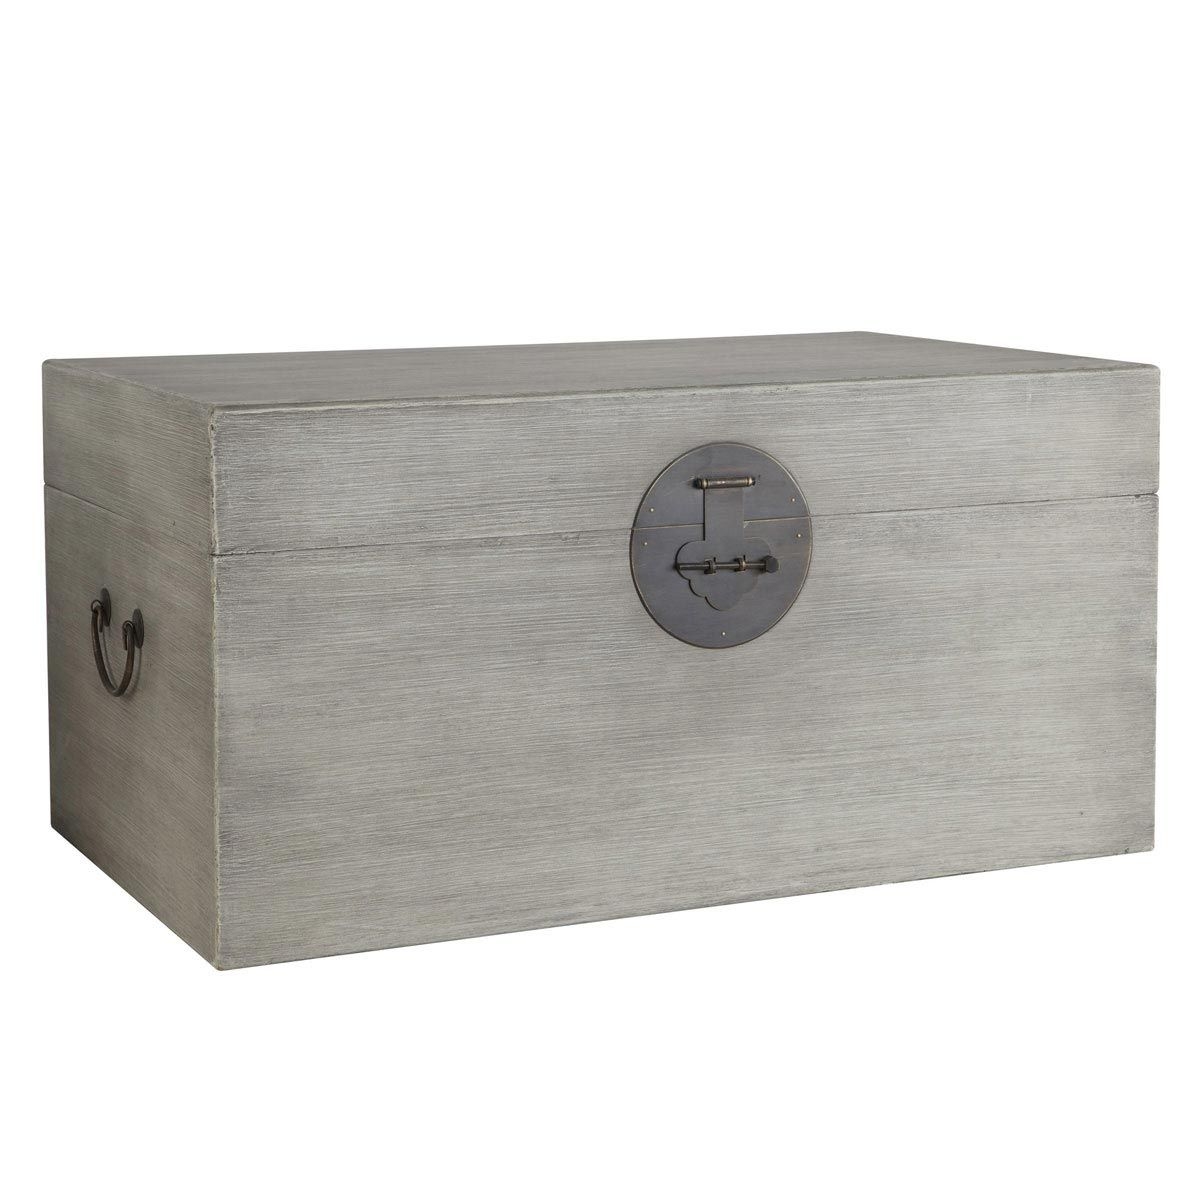 Chinese wooden storage trunk large grey